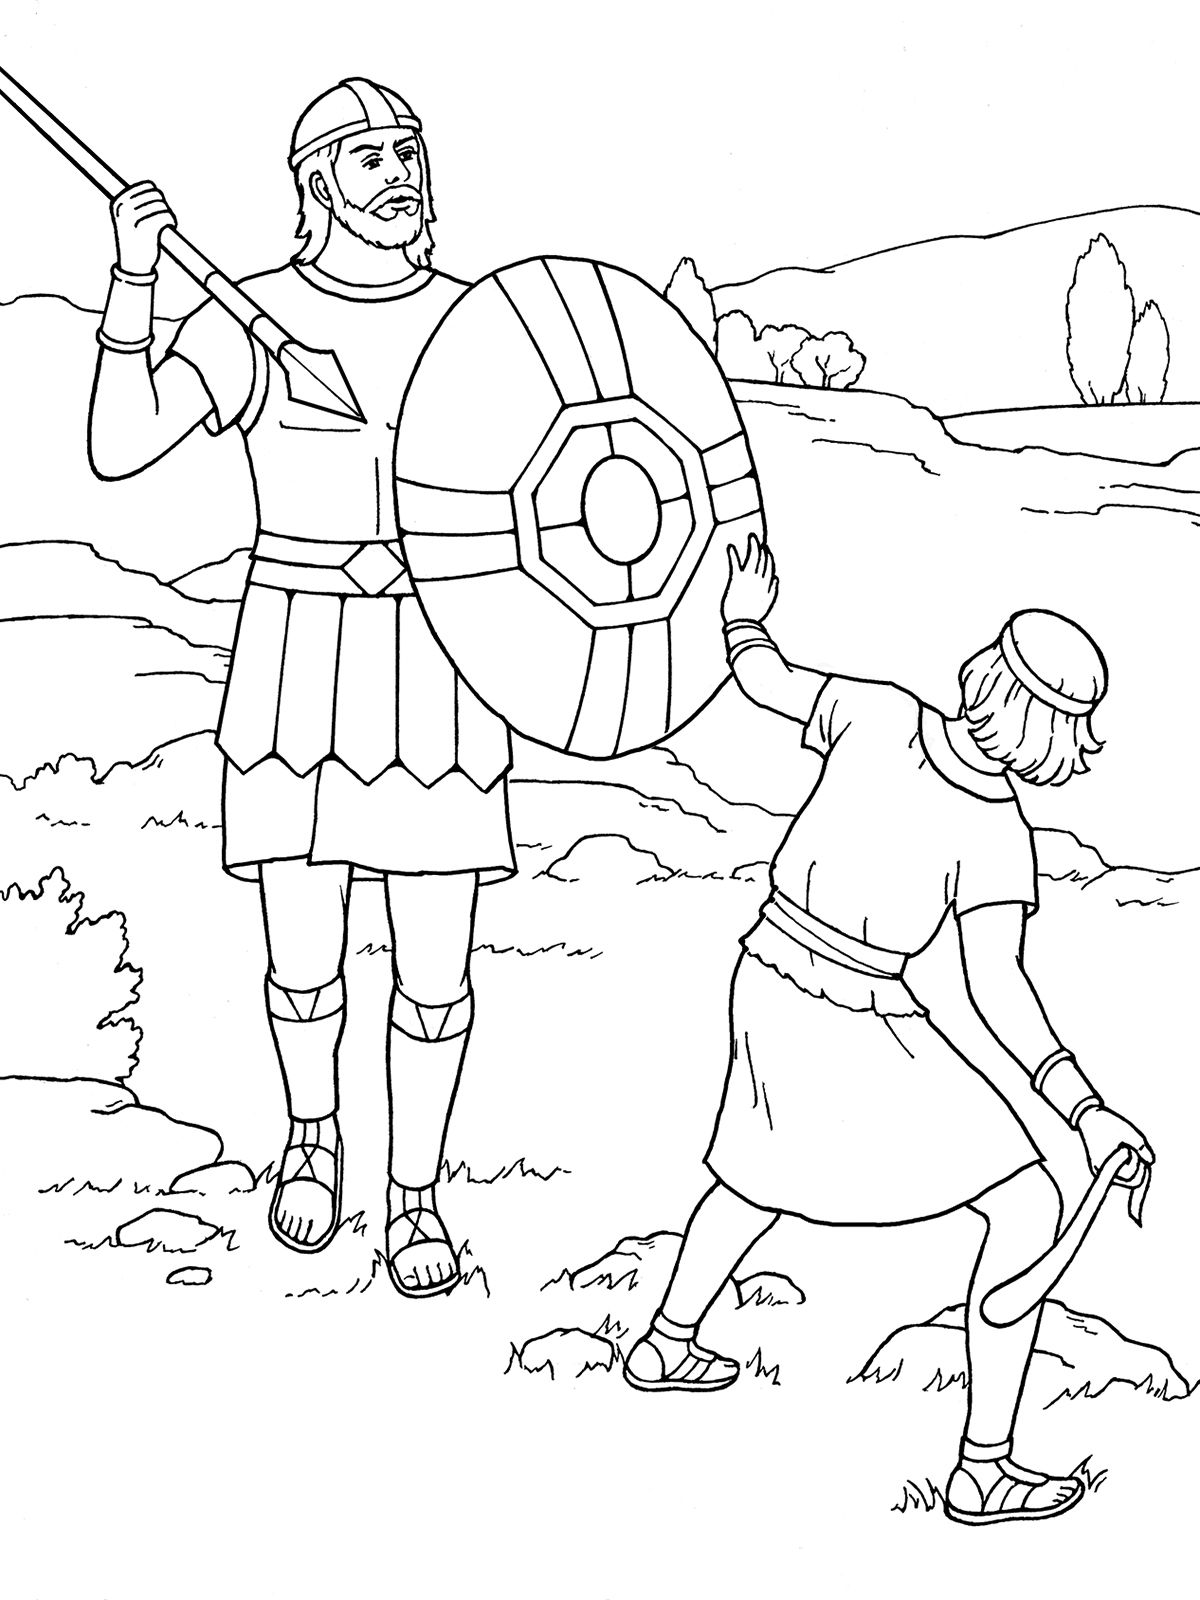 sunday school coloring pages david and goliath